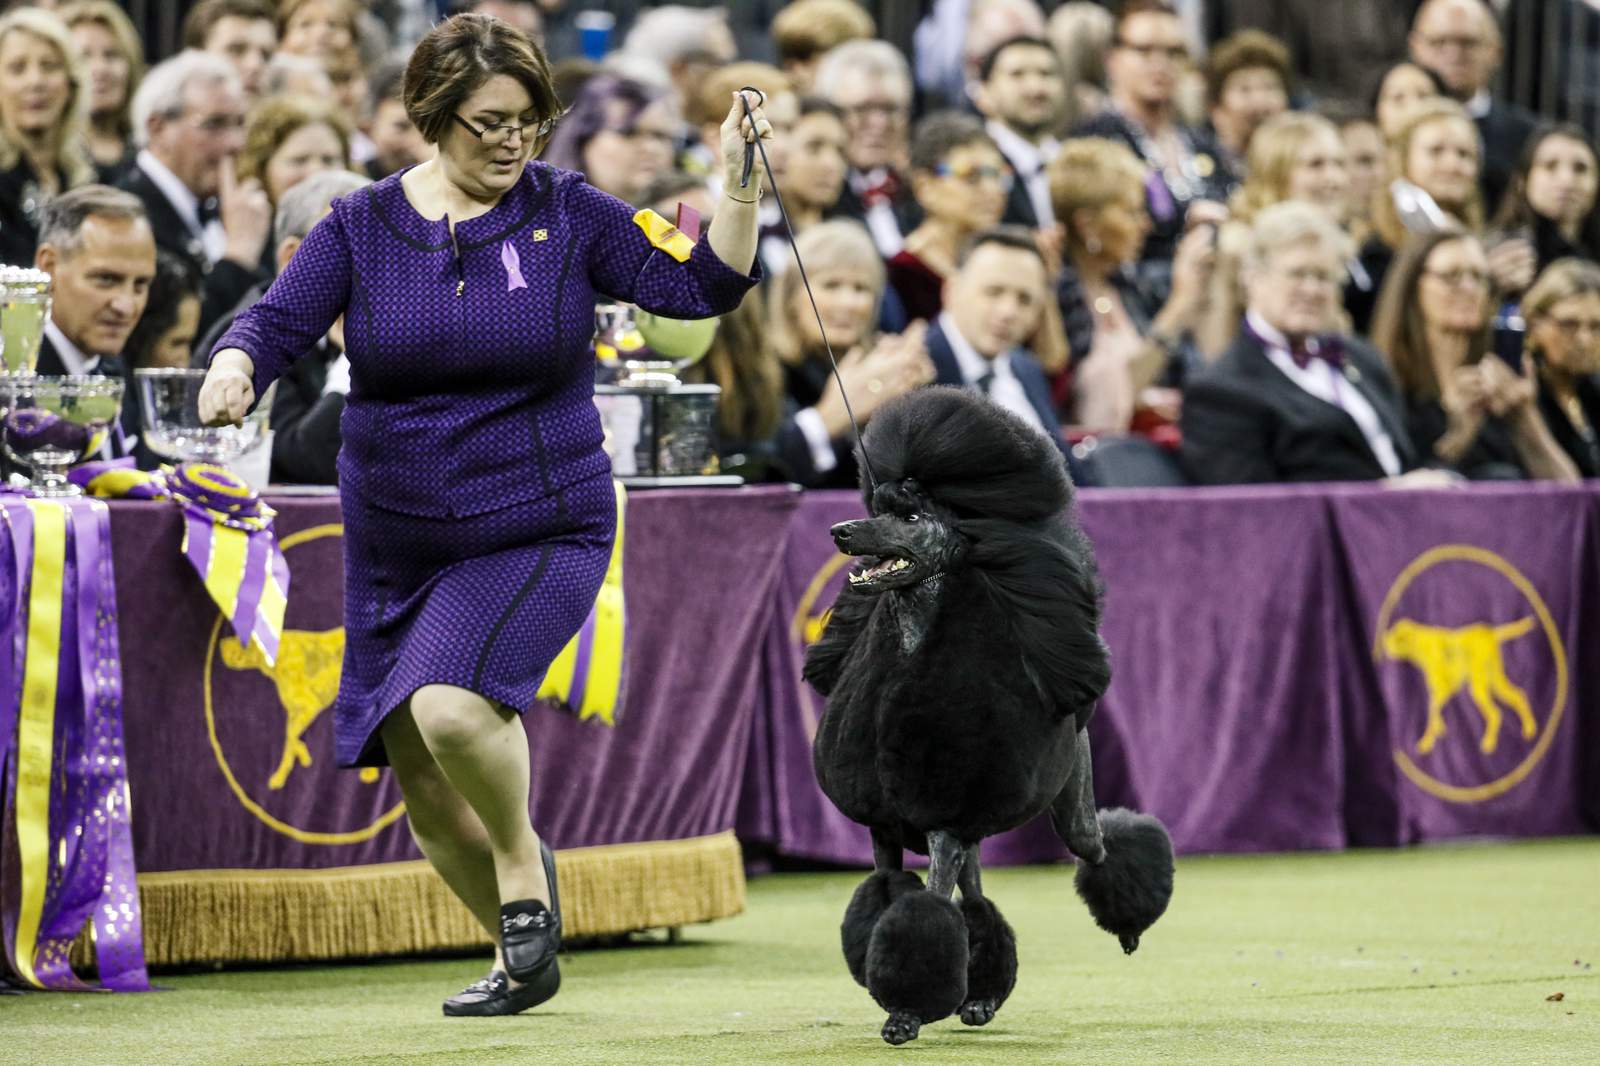 Westminster dog show to return to NYC in January 2022